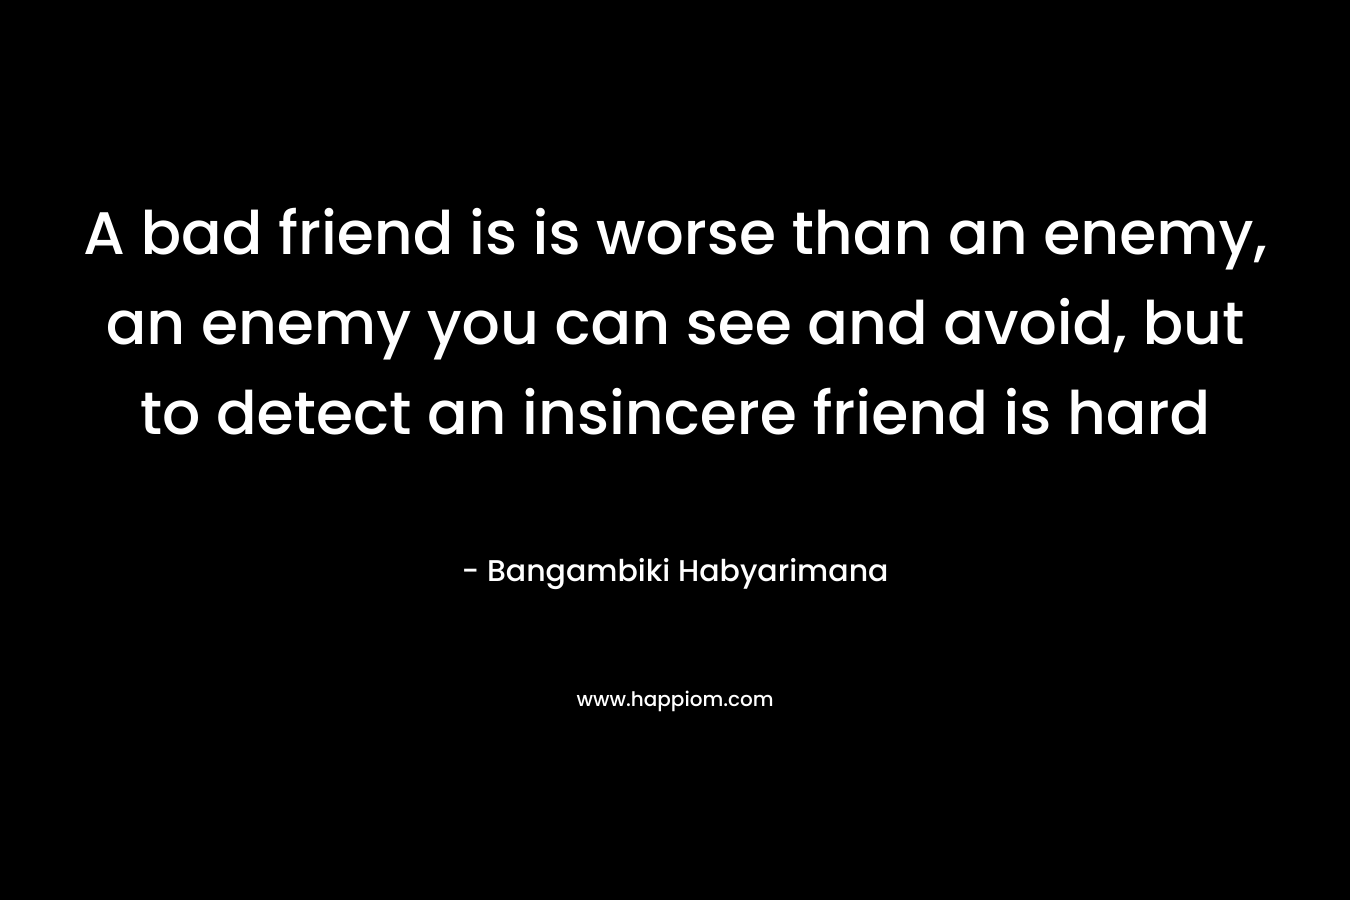 A bad friend is is worse than an enemy, an enemy you can see and avoid, but to detect an insincere friend is hard